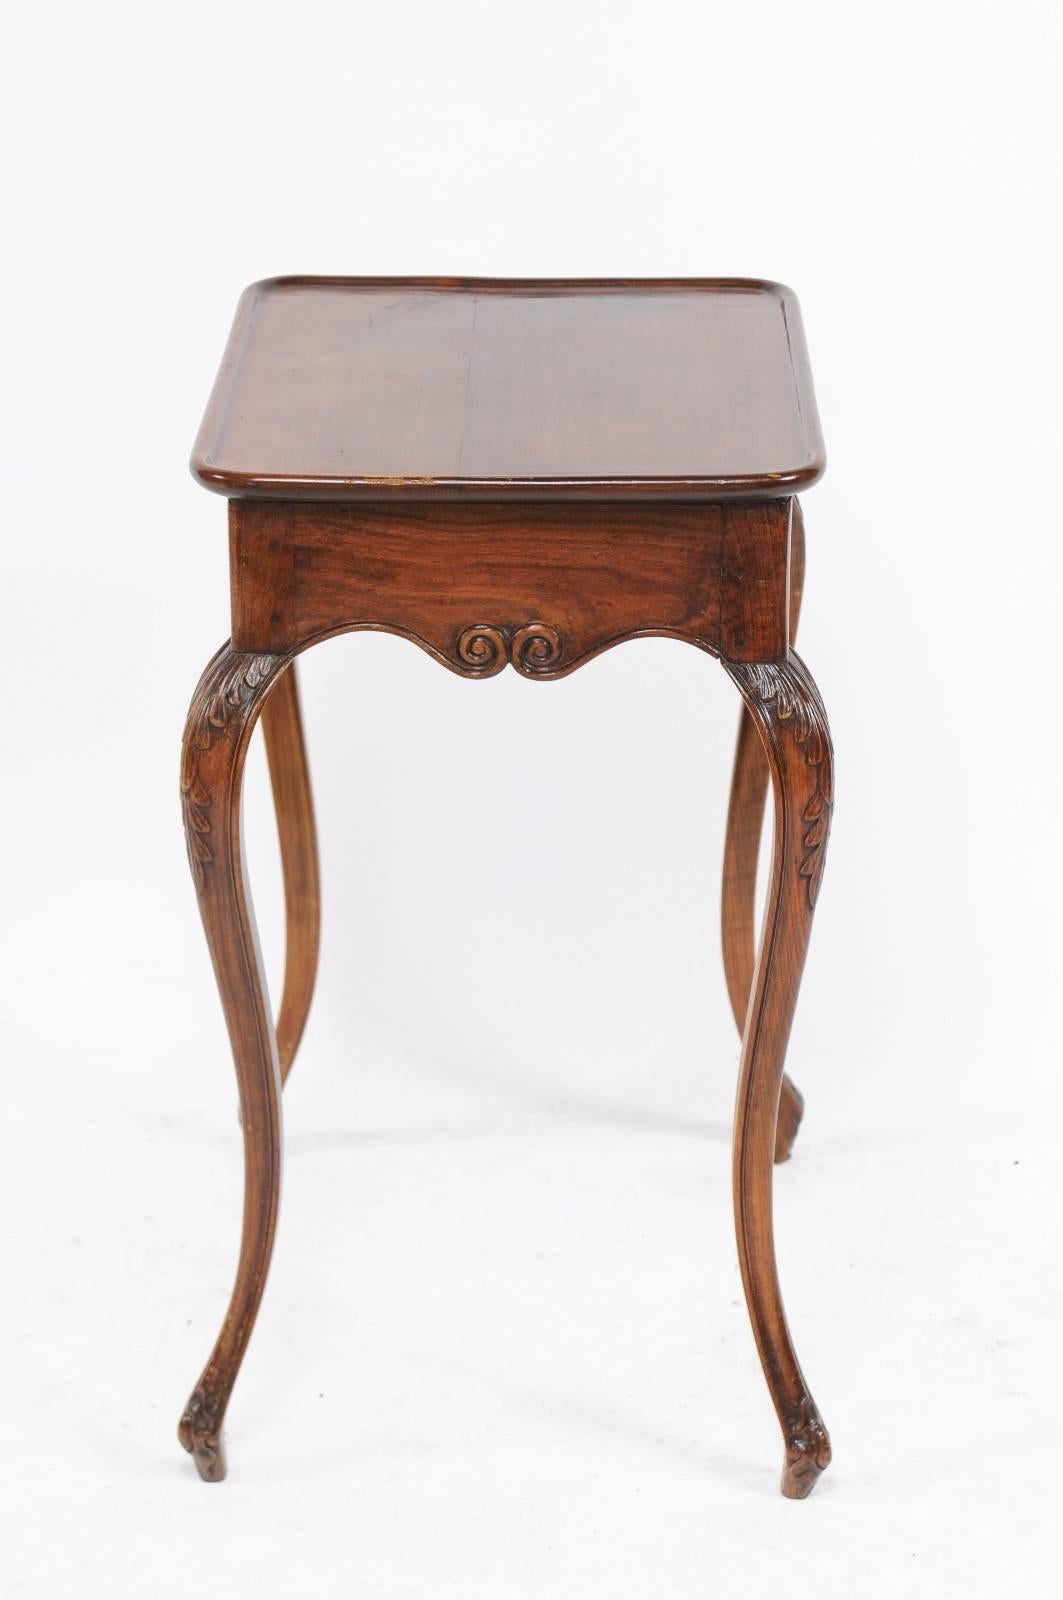 A French Louis XV style walnut side table from the 19th century with tray top, carved apron and cabriole legs carved with acanthus leaves. We’re not sure what we loved first about this 19th century Louis XV walnut table: its long, flirty legs or the